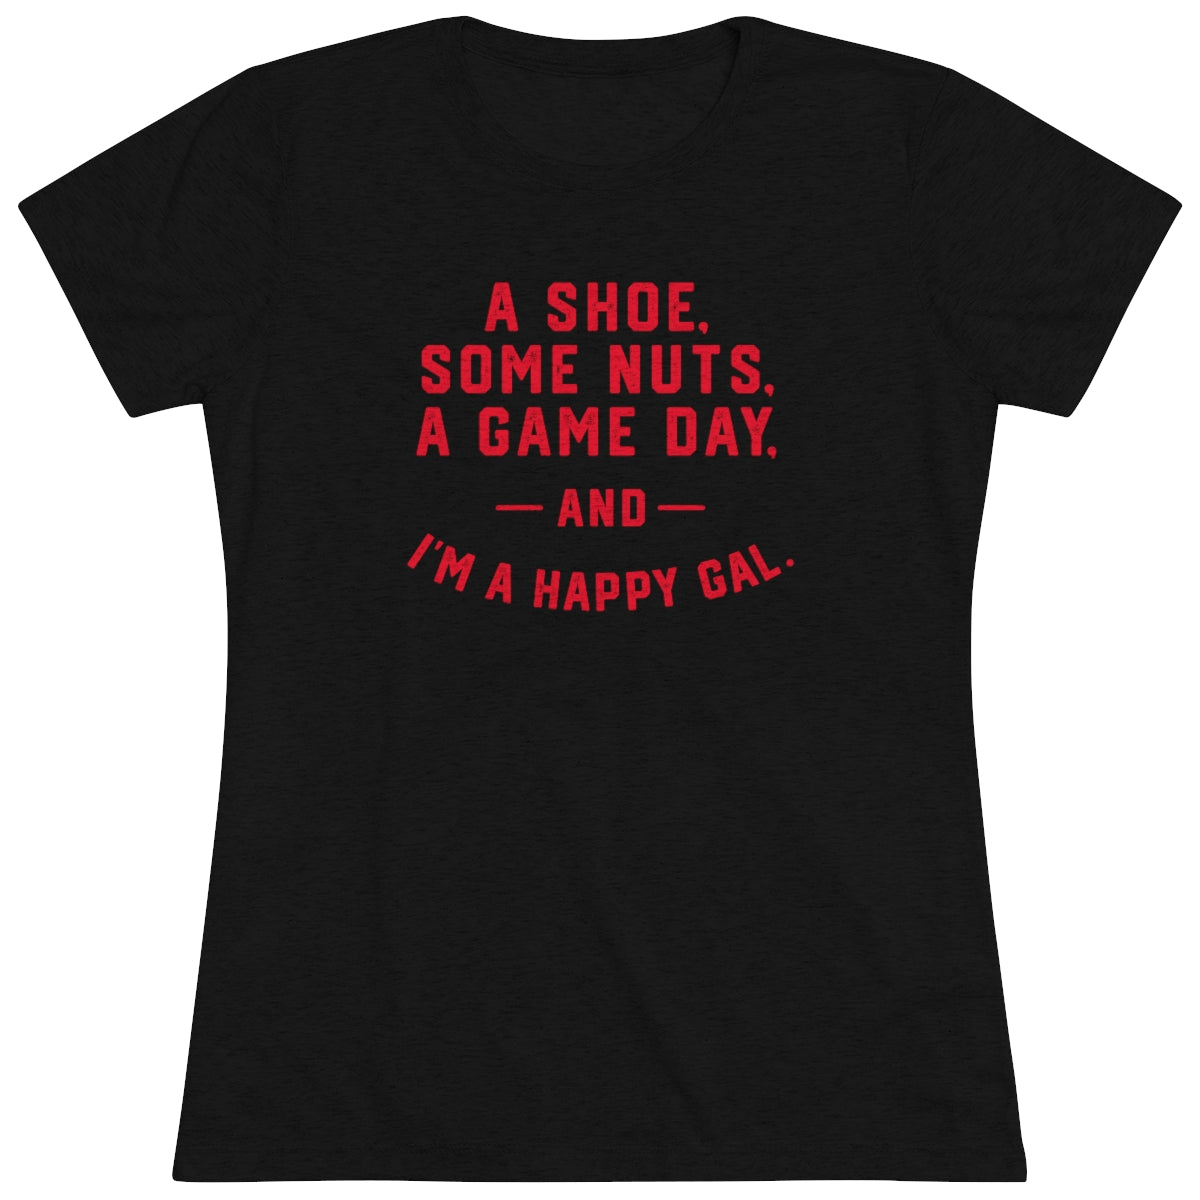 A SHOE. SOME NUTS. GAMEDAY.-Women's Triblend Tee